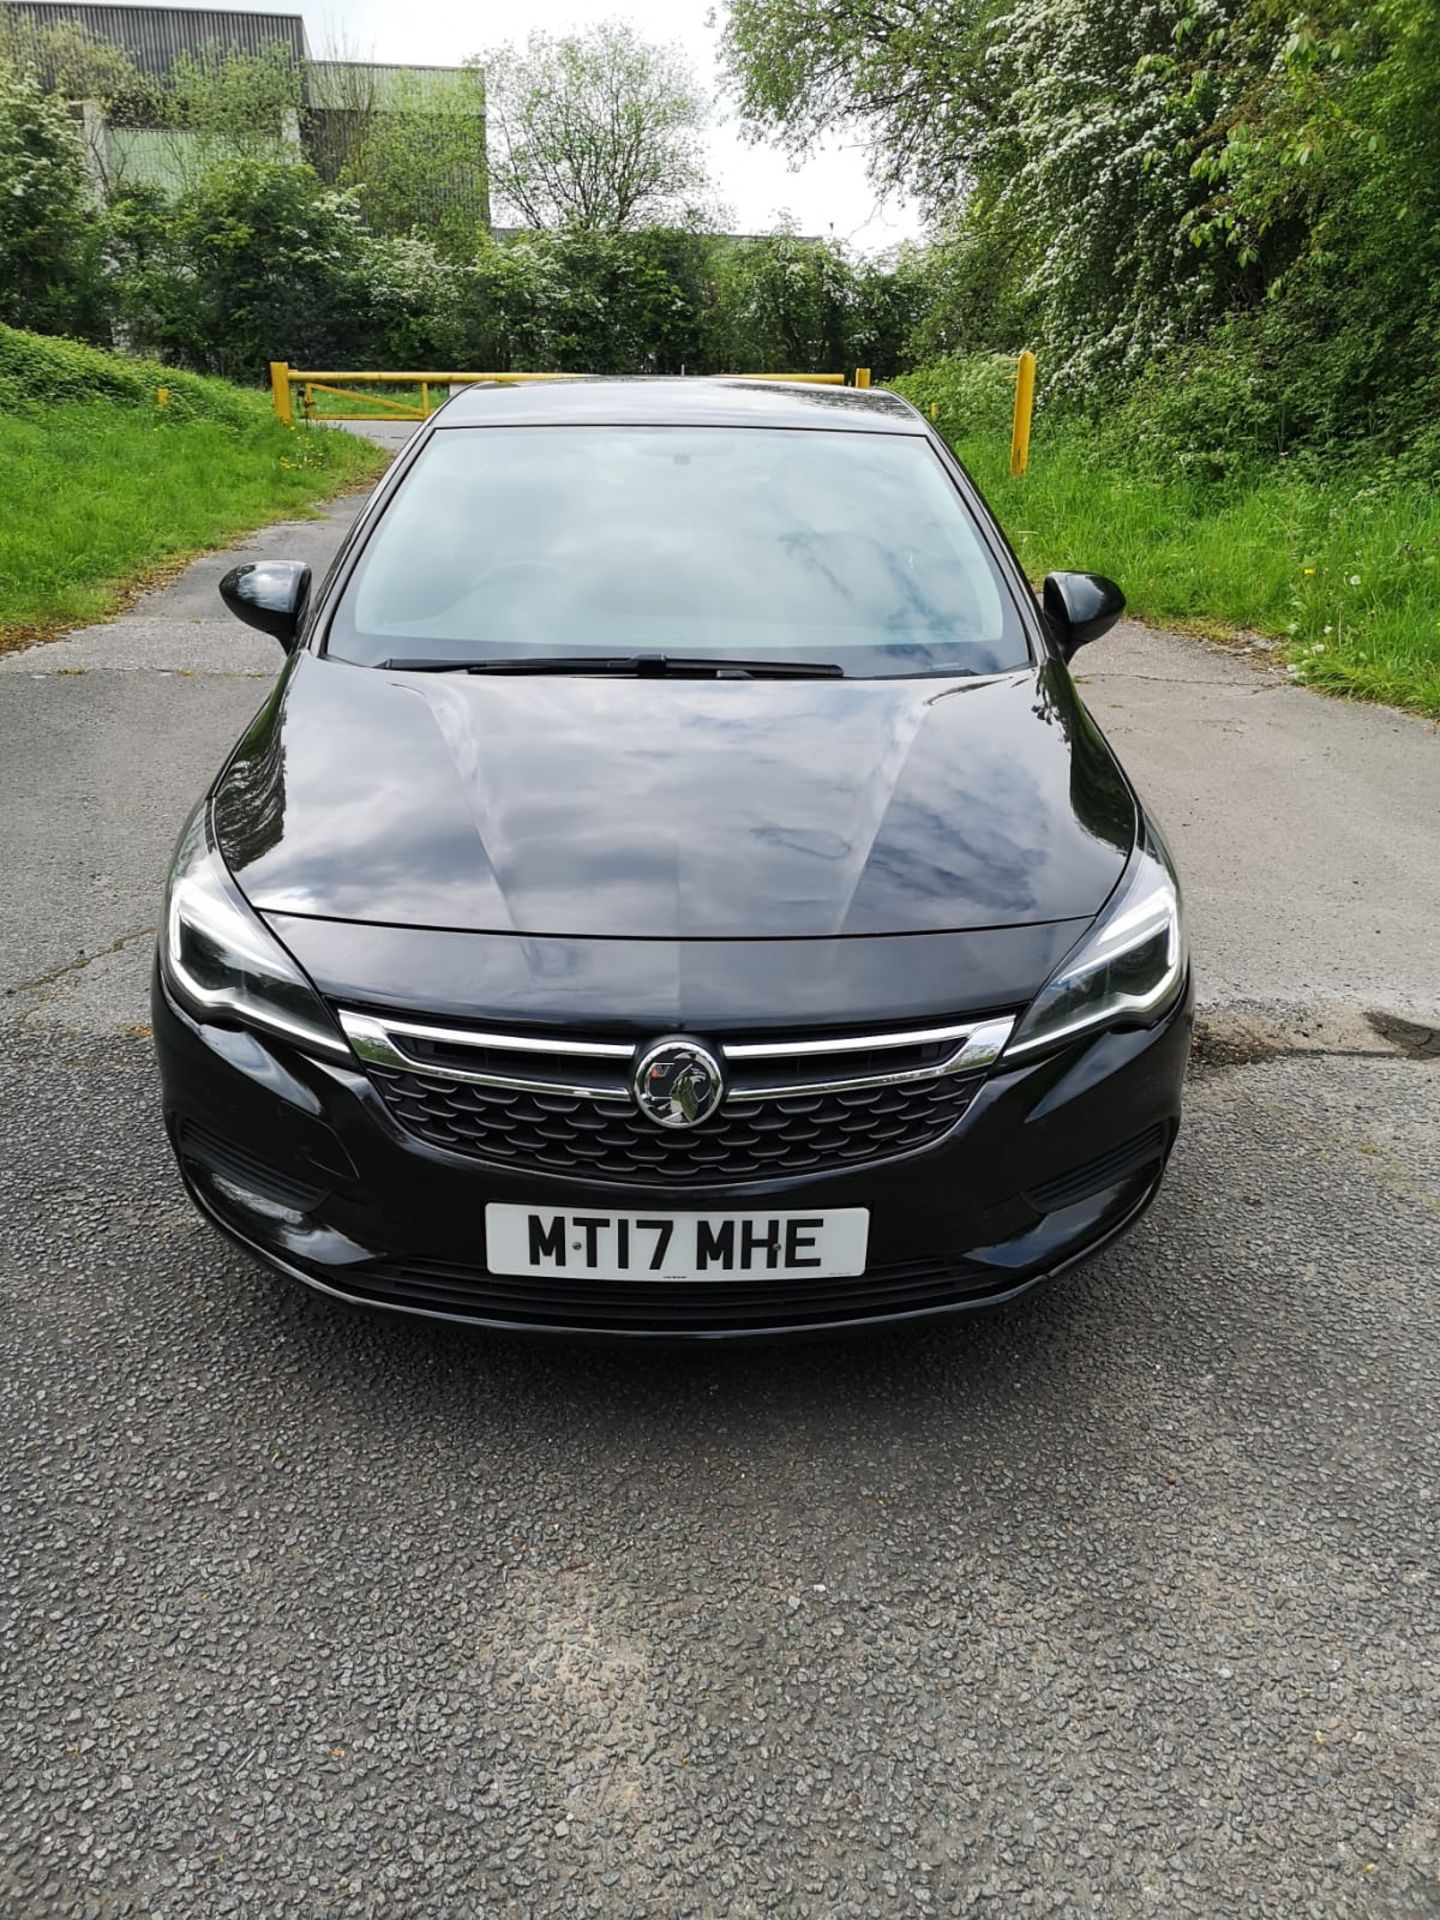 2017/17 REG VAUXHALL ASTRA TECH LINE TURBO S/S 1.4 PETROL AUTOMATIC, SHOWING 1 FORMER KEEPER - Image 2 of 14